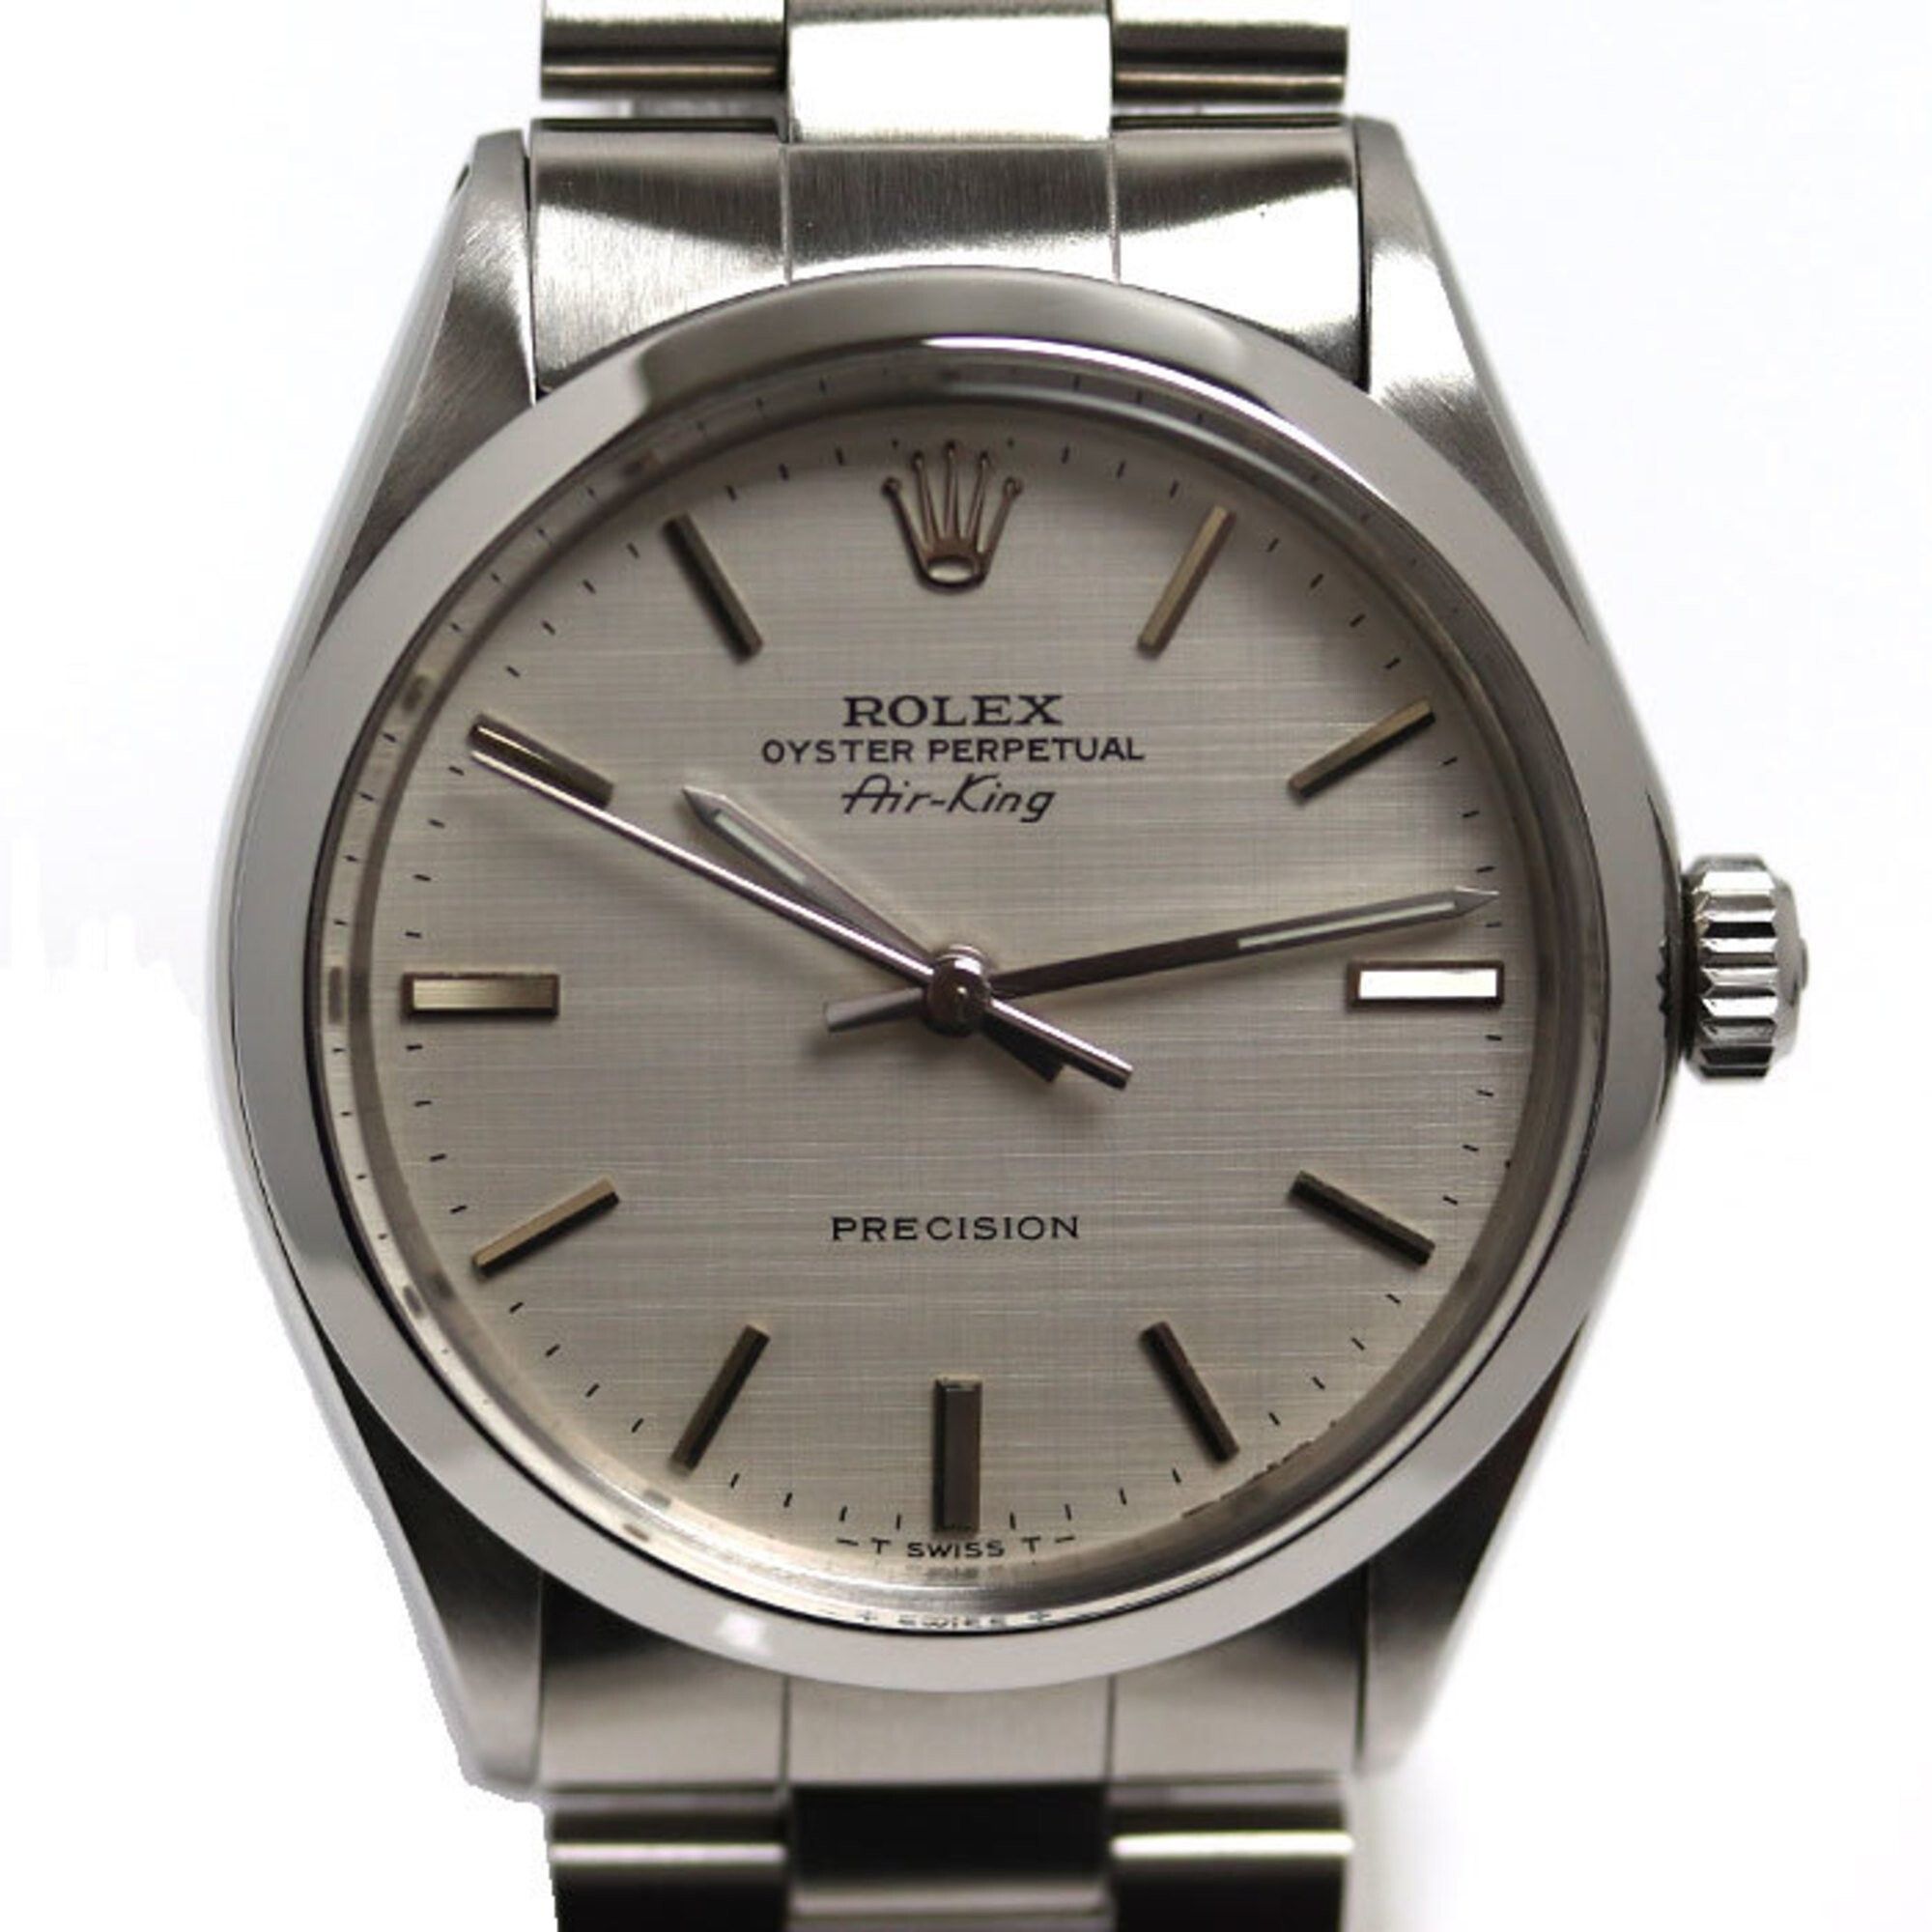 image of Rolex Air King Watch Automatic Winding 5500 Mosaic Dial Product Men's in Silver